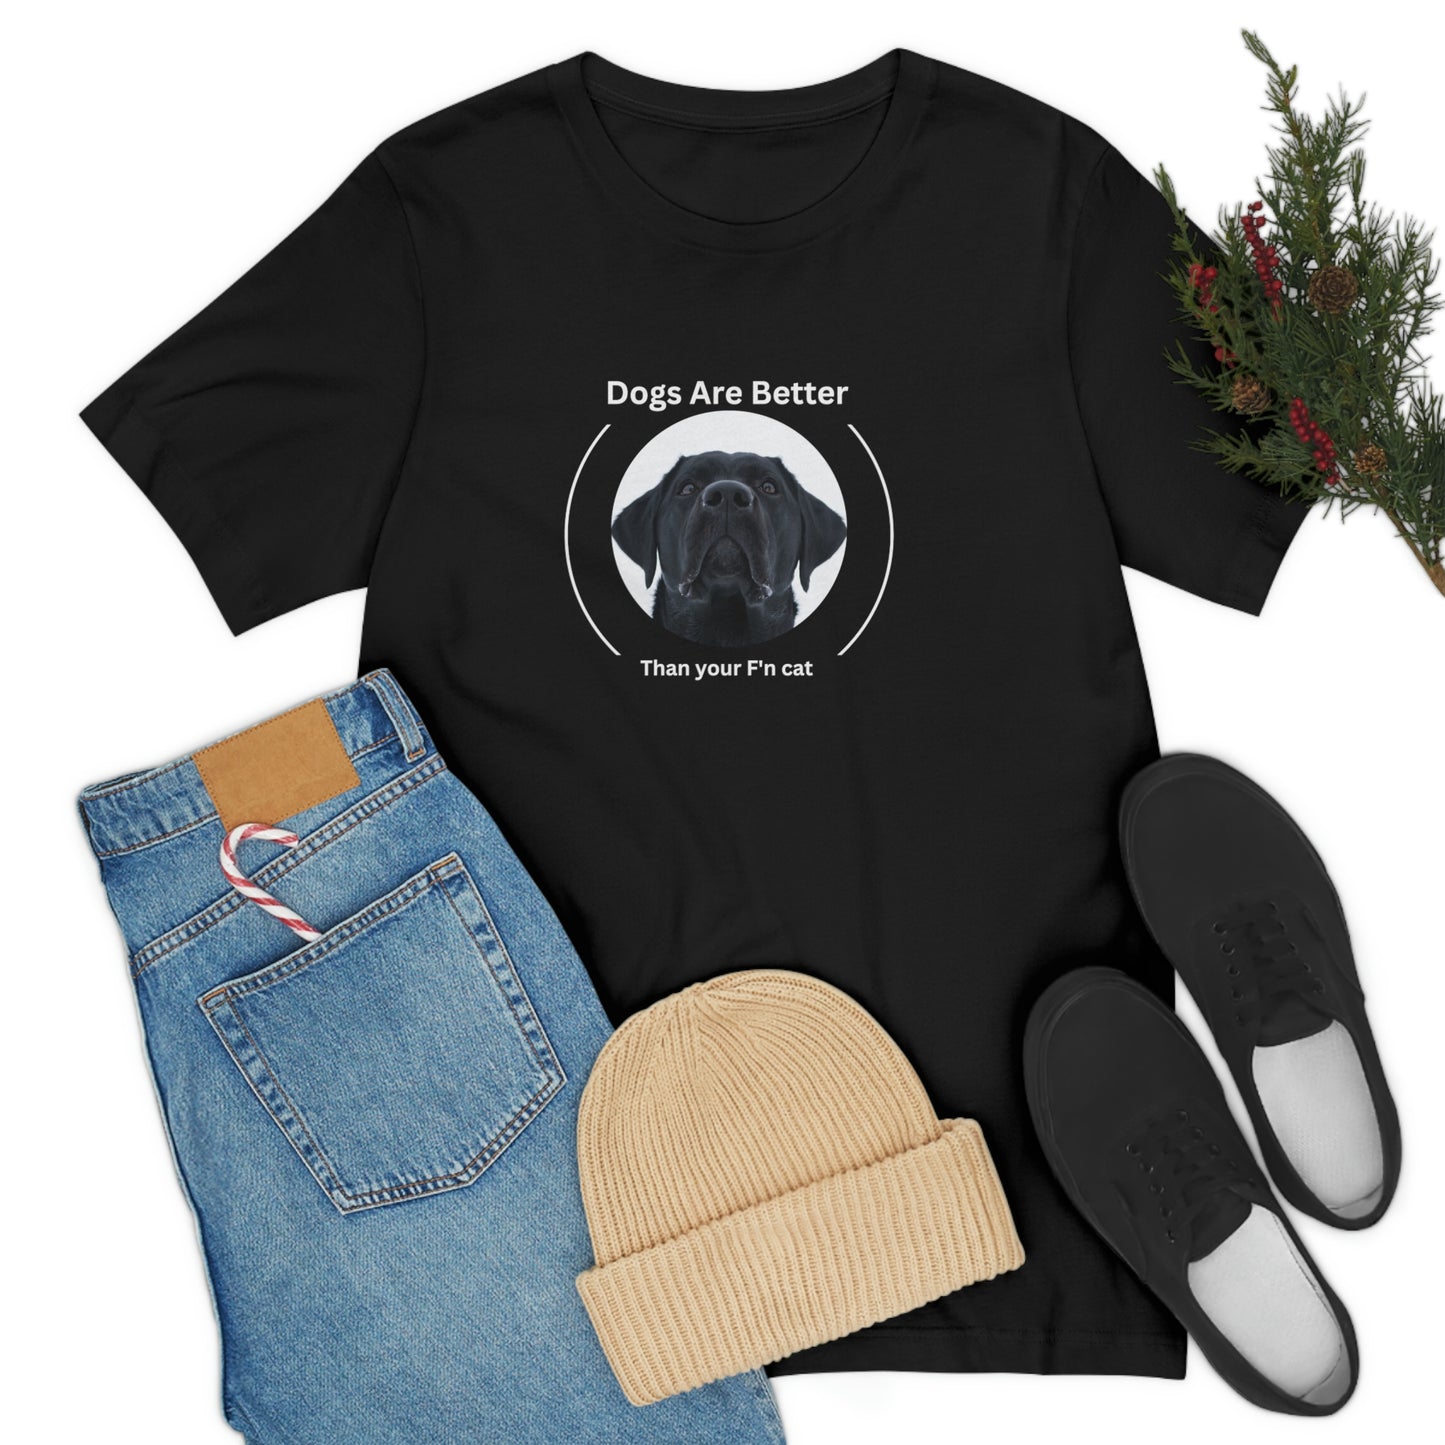 Unisex Jersey Short Sleeve Tee: Dog Lovers:  My Dog is Better than your Fn Cat